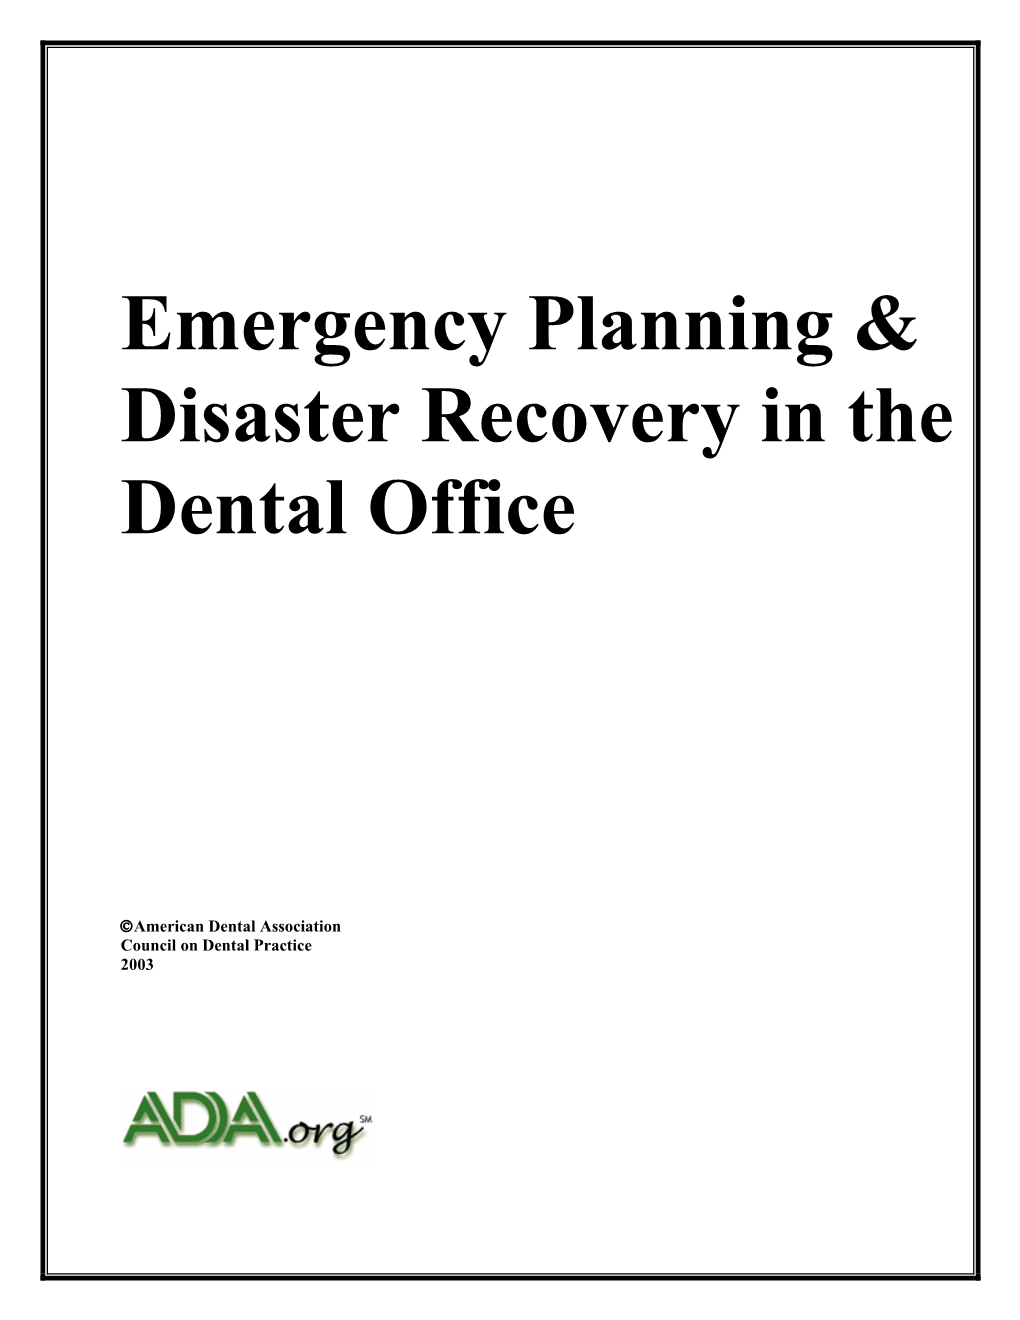 ADA.Org: Emergency Planning & Disaster Recovery in the Dental Office